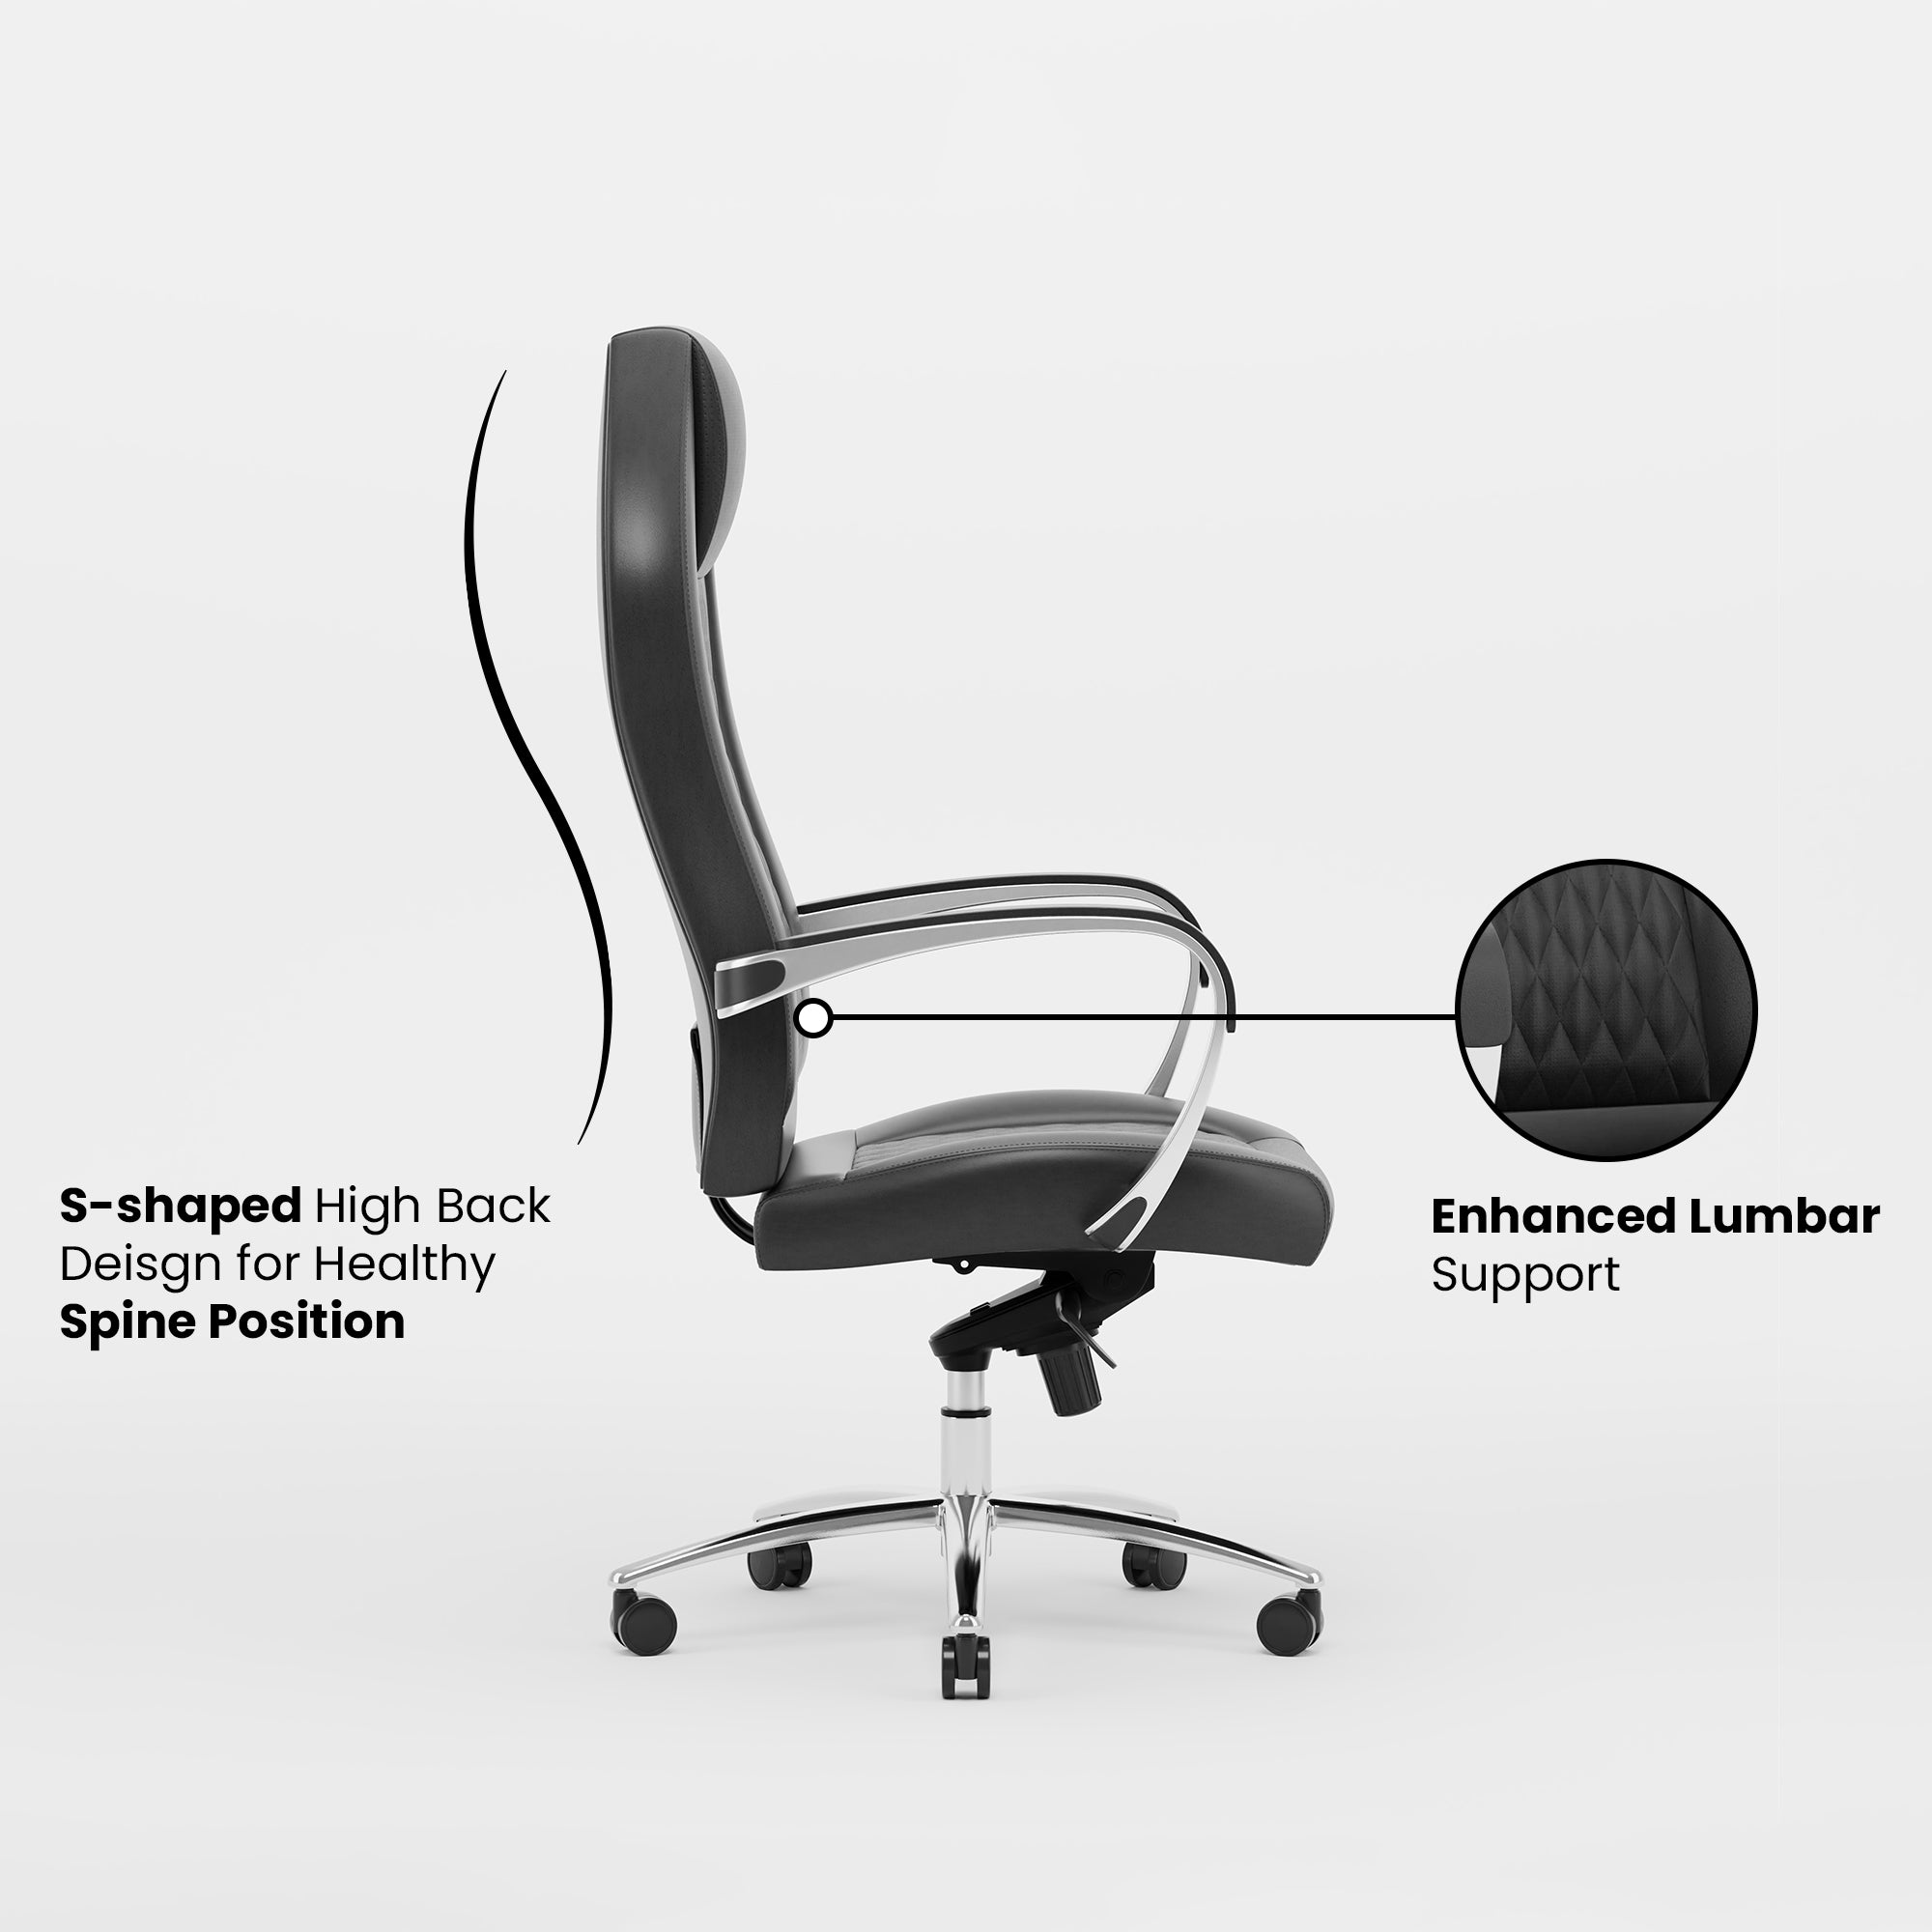 Green Soul Crest High Back Executive Chair